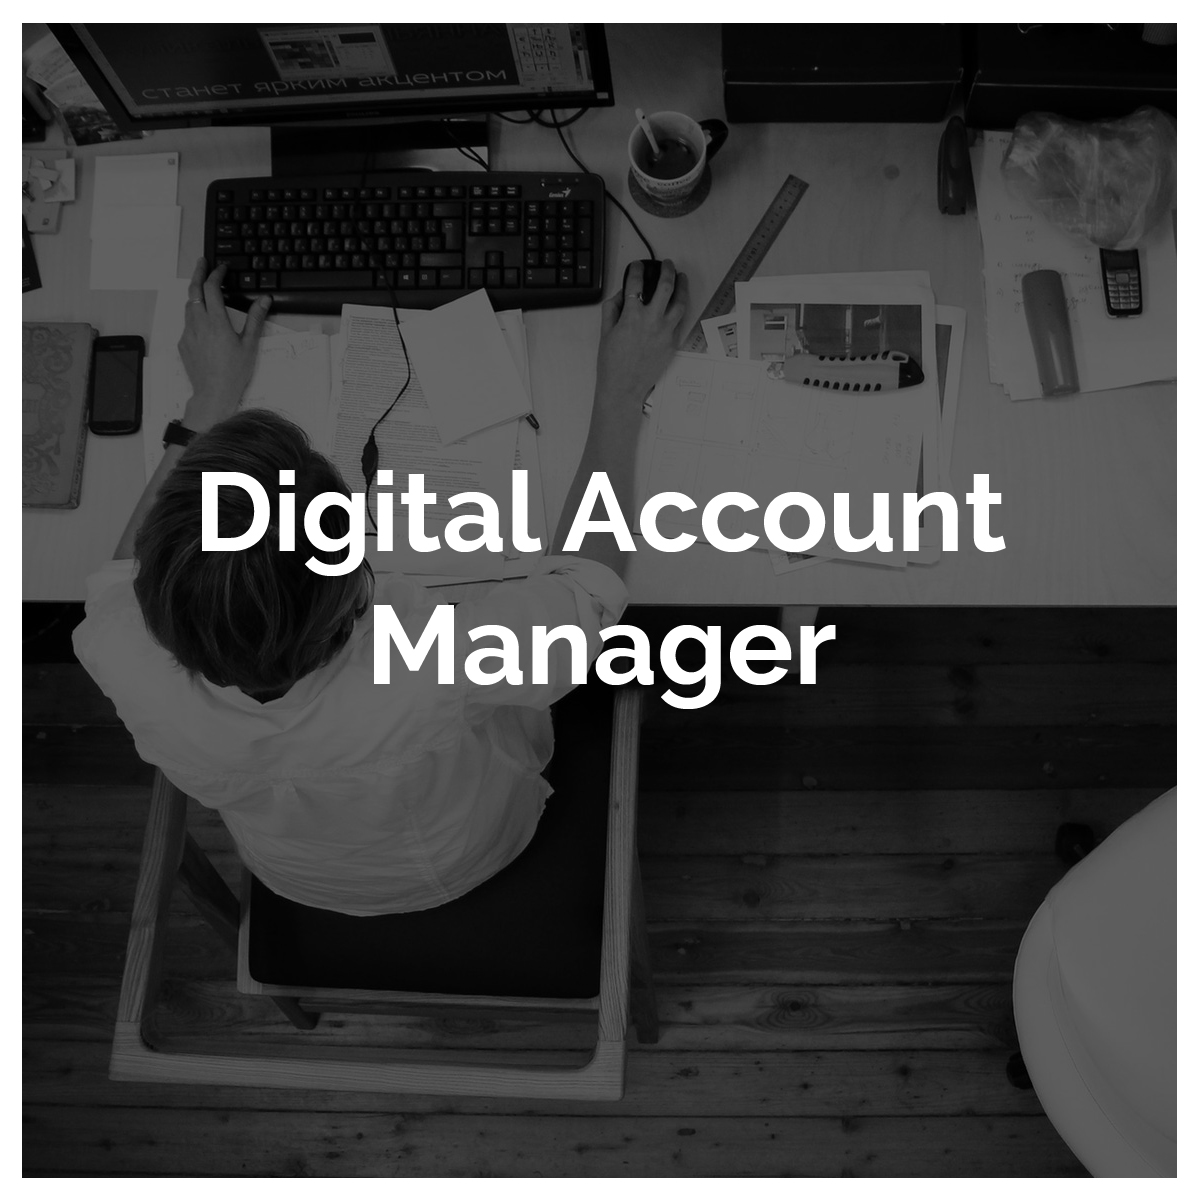 Digital Account Manager at work